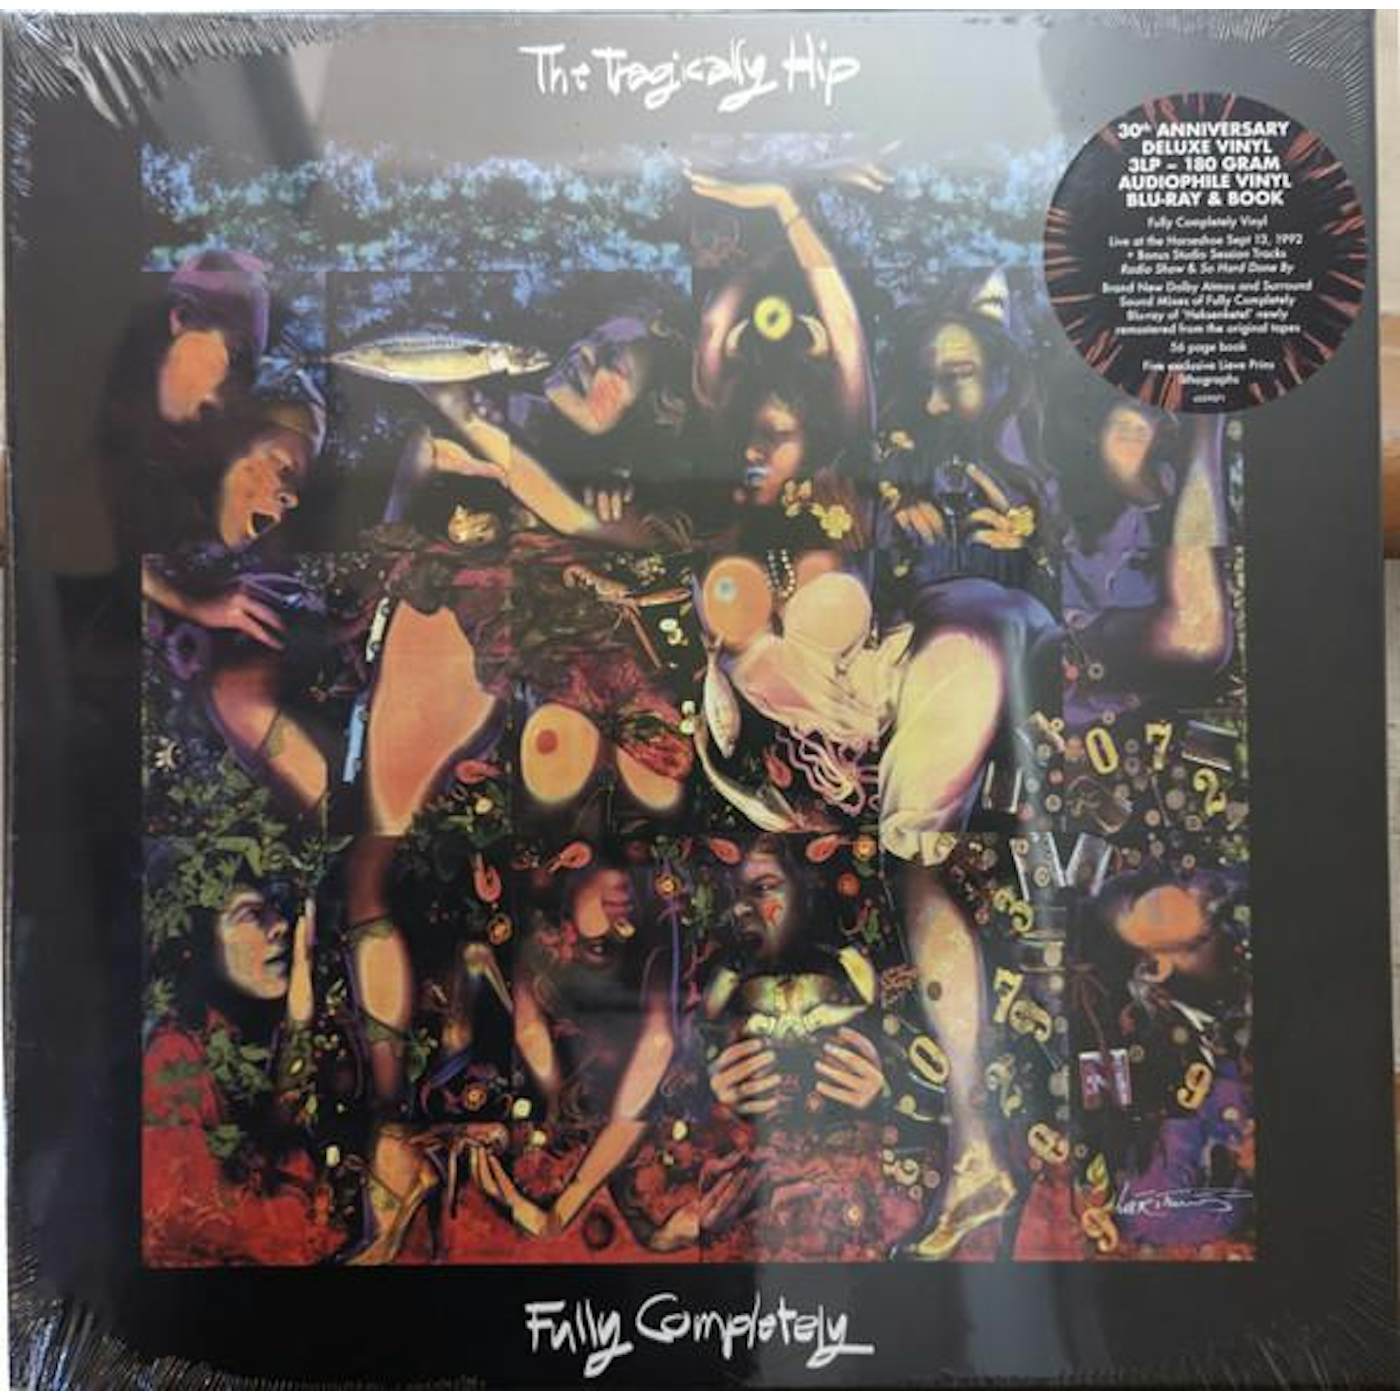 The Tragically Hip FULLY COMPLETELY (30TH ANNIVERSARY/DELUXE/3LP/BLU-RAY BOX SET) (Vinyl)